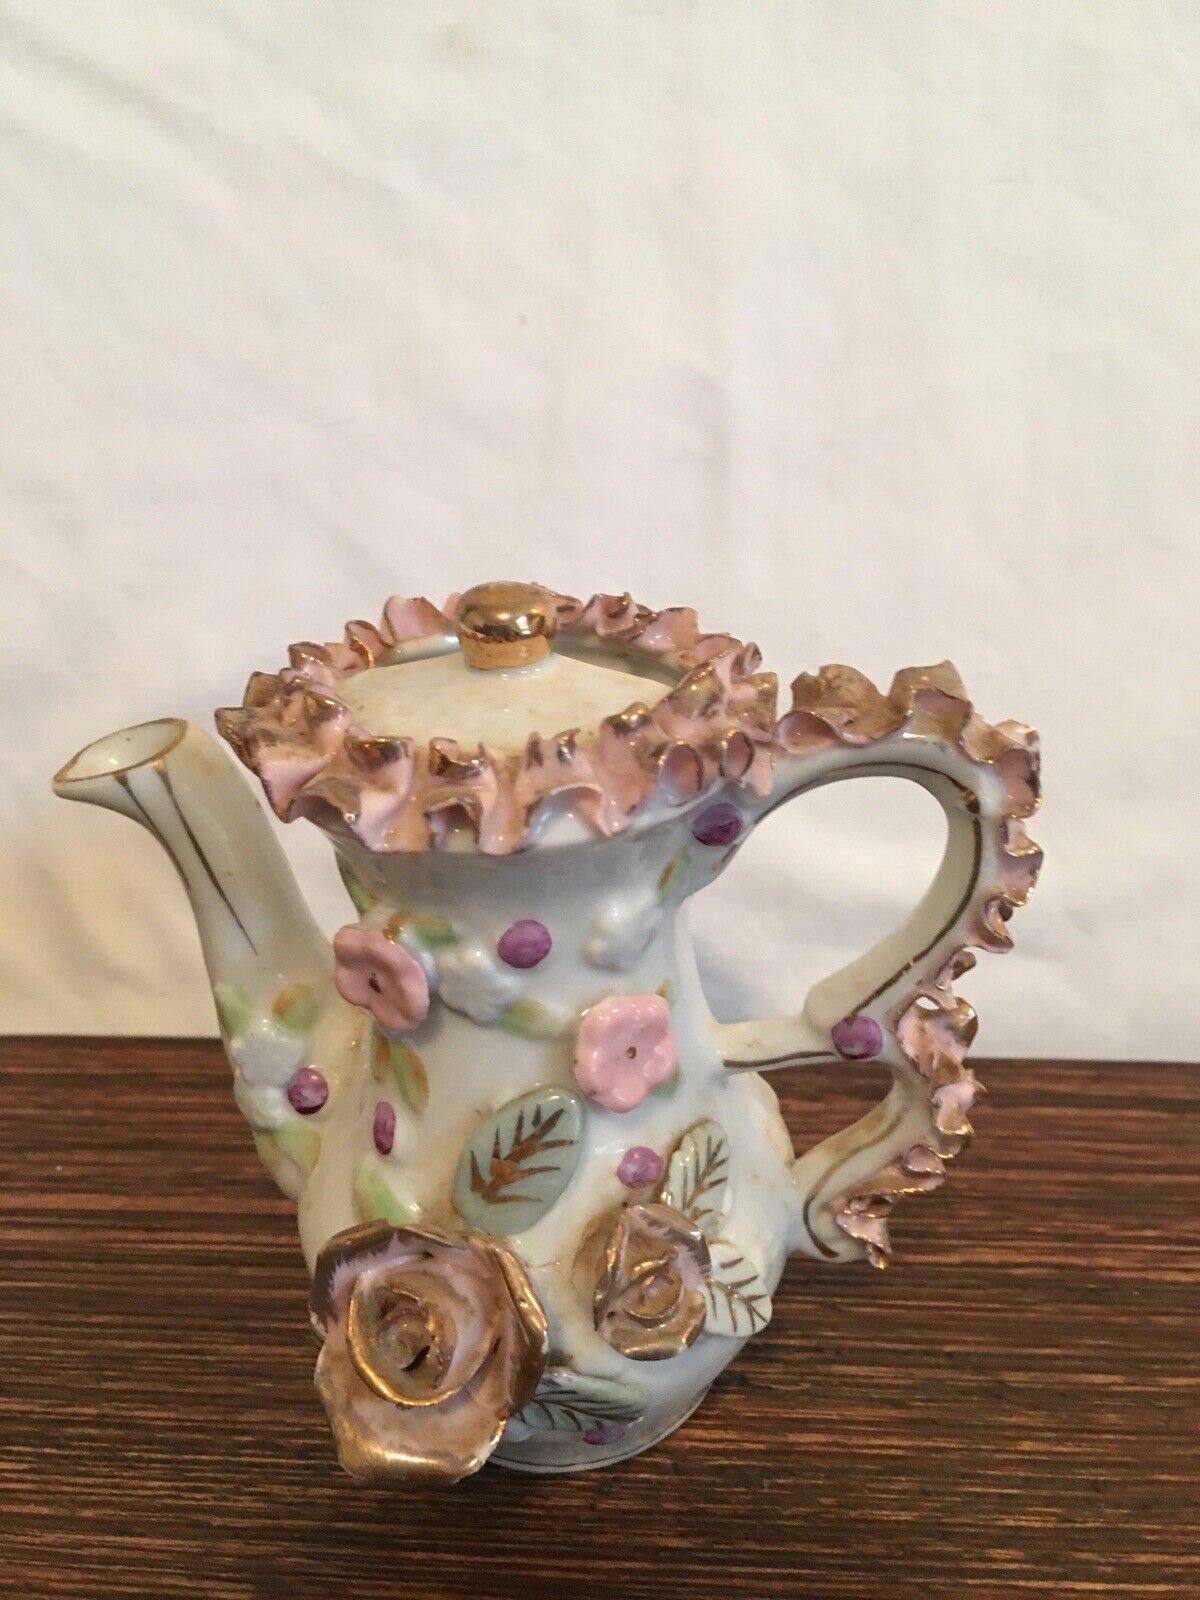 Tea Pot Small Ruffled Edge White With Pink Roses And Gold Trim Japan 